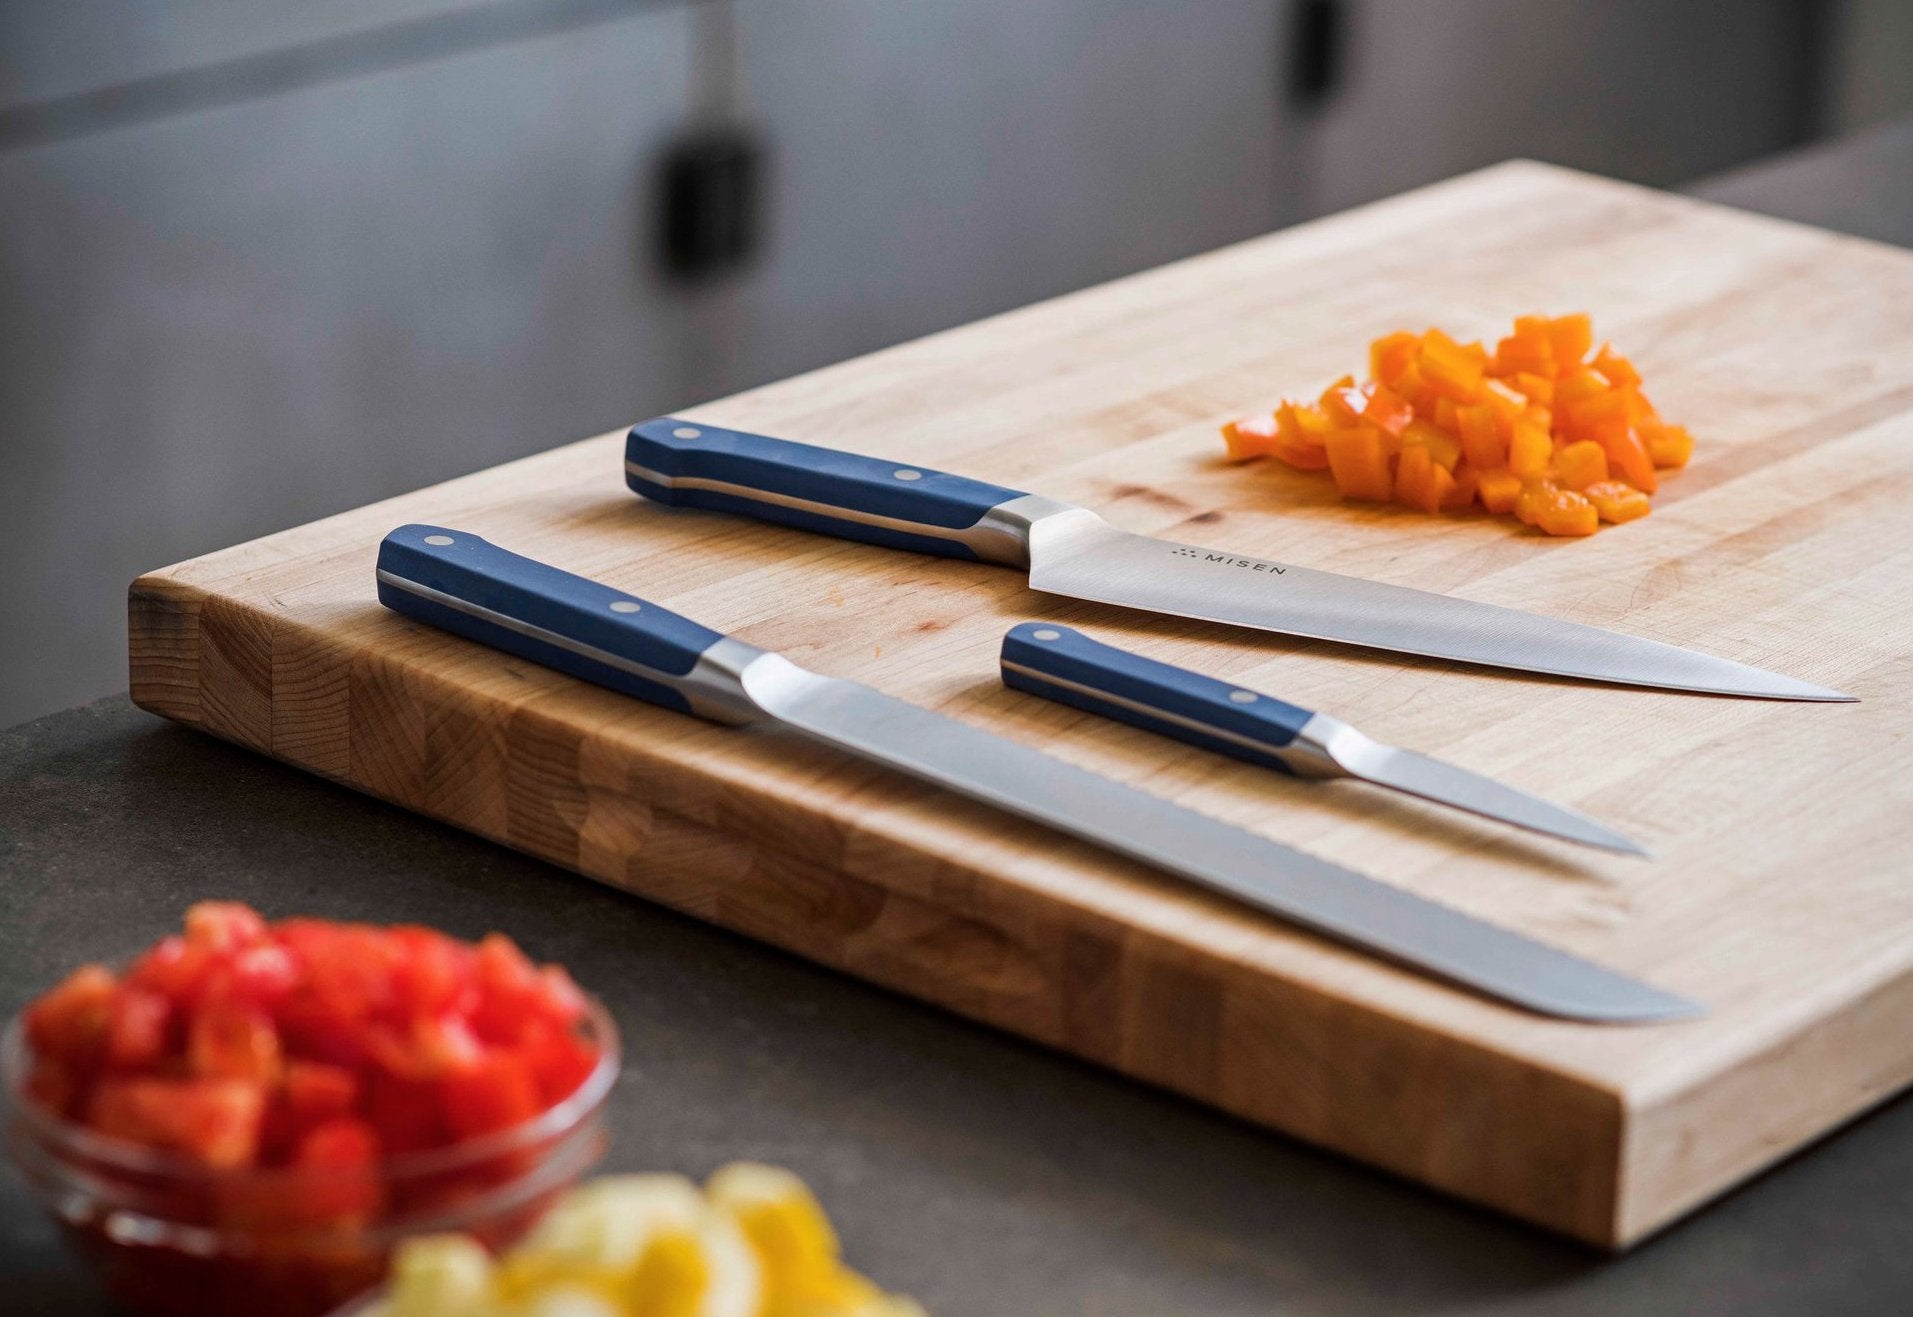 Knife set: the Misen Essentials Knife Set on a cutting board